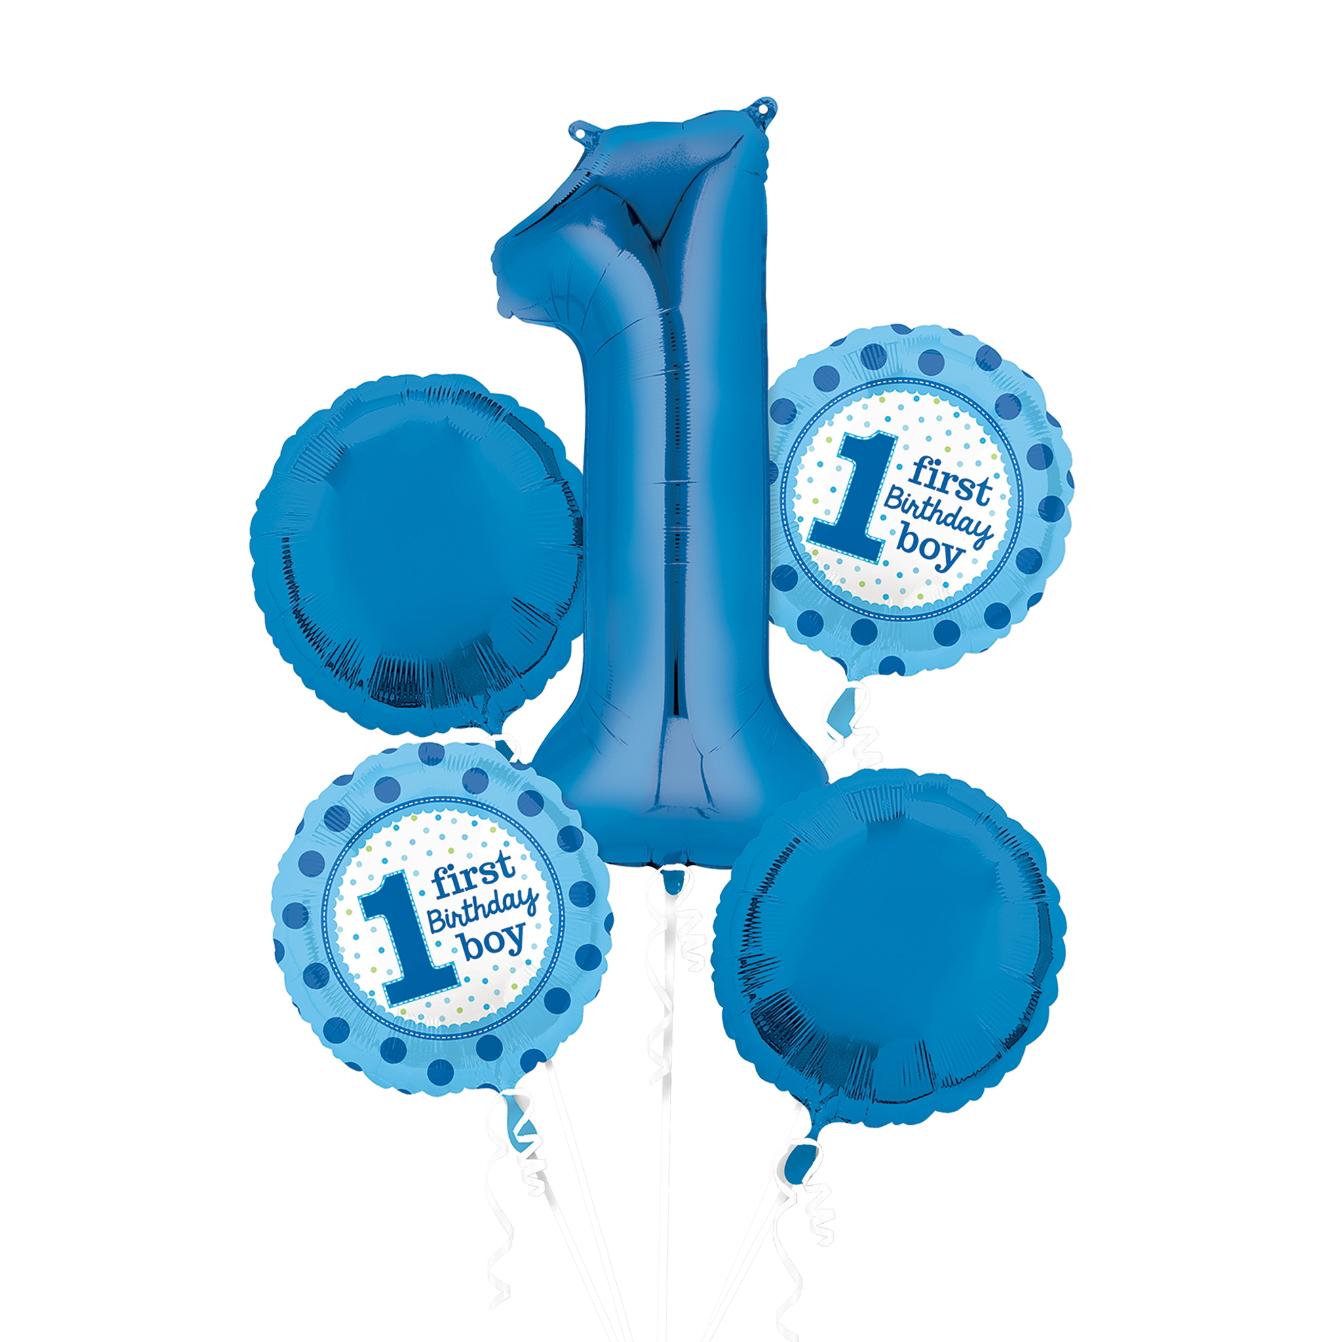 1st Birthday Boy Balloon Bouquet 5pcs Balloons & Streamers - Party Centre